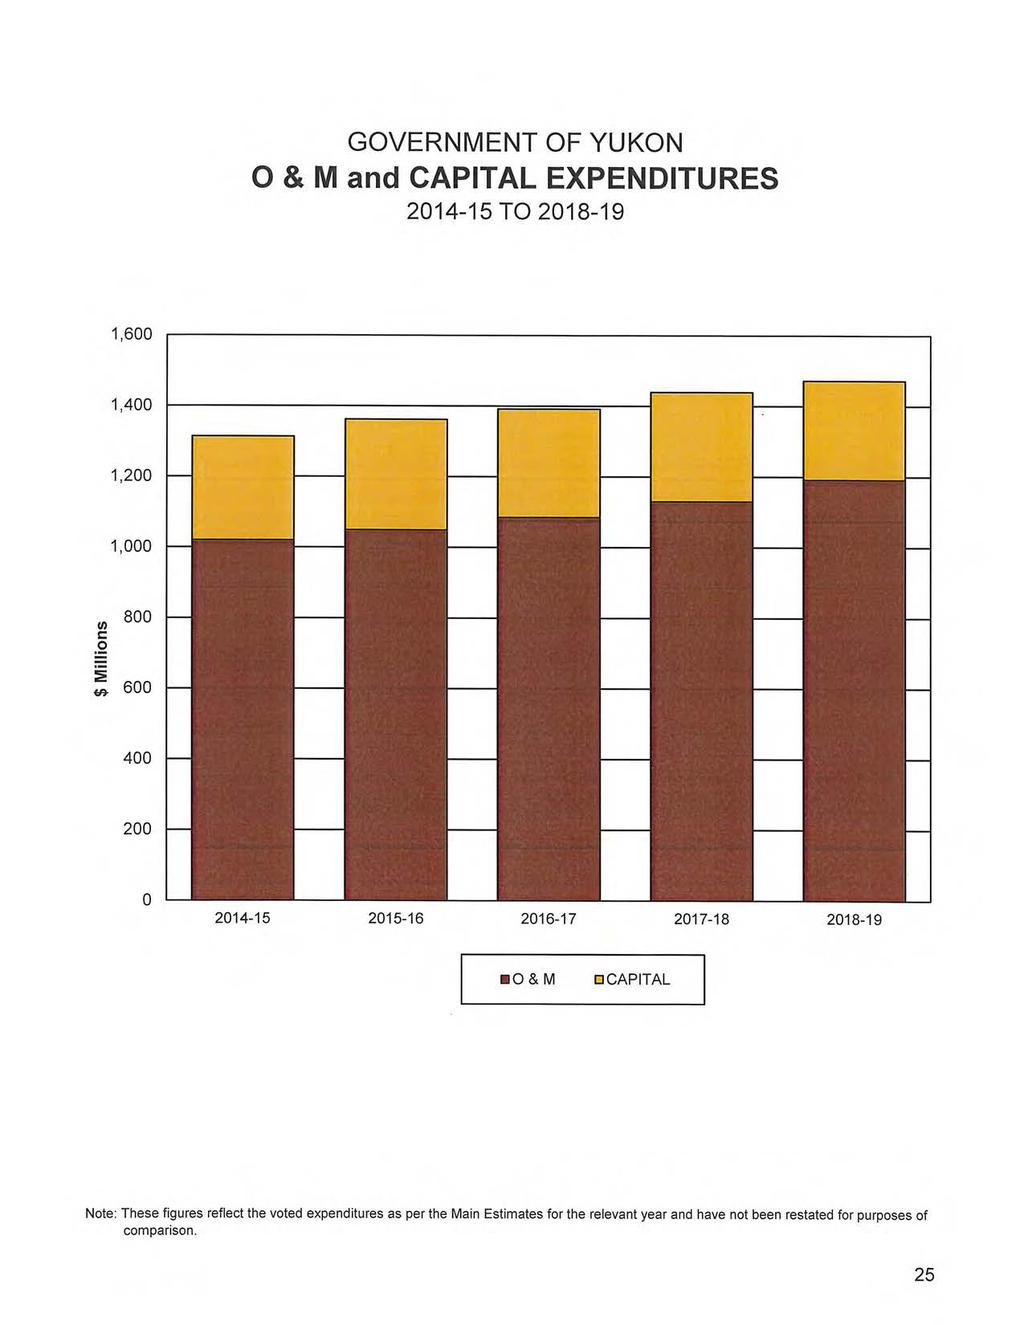 GOVERNMENT OF YUKON 0 & M and CAPITAL EXPENDITURES 2014-15 TO 2018-19 1,600 1,400 1,200 1,000 1/) 800 1: g ~ ~ 600 400 200 0 2014-15 2015-16 2016-17 2017-18 2018-19